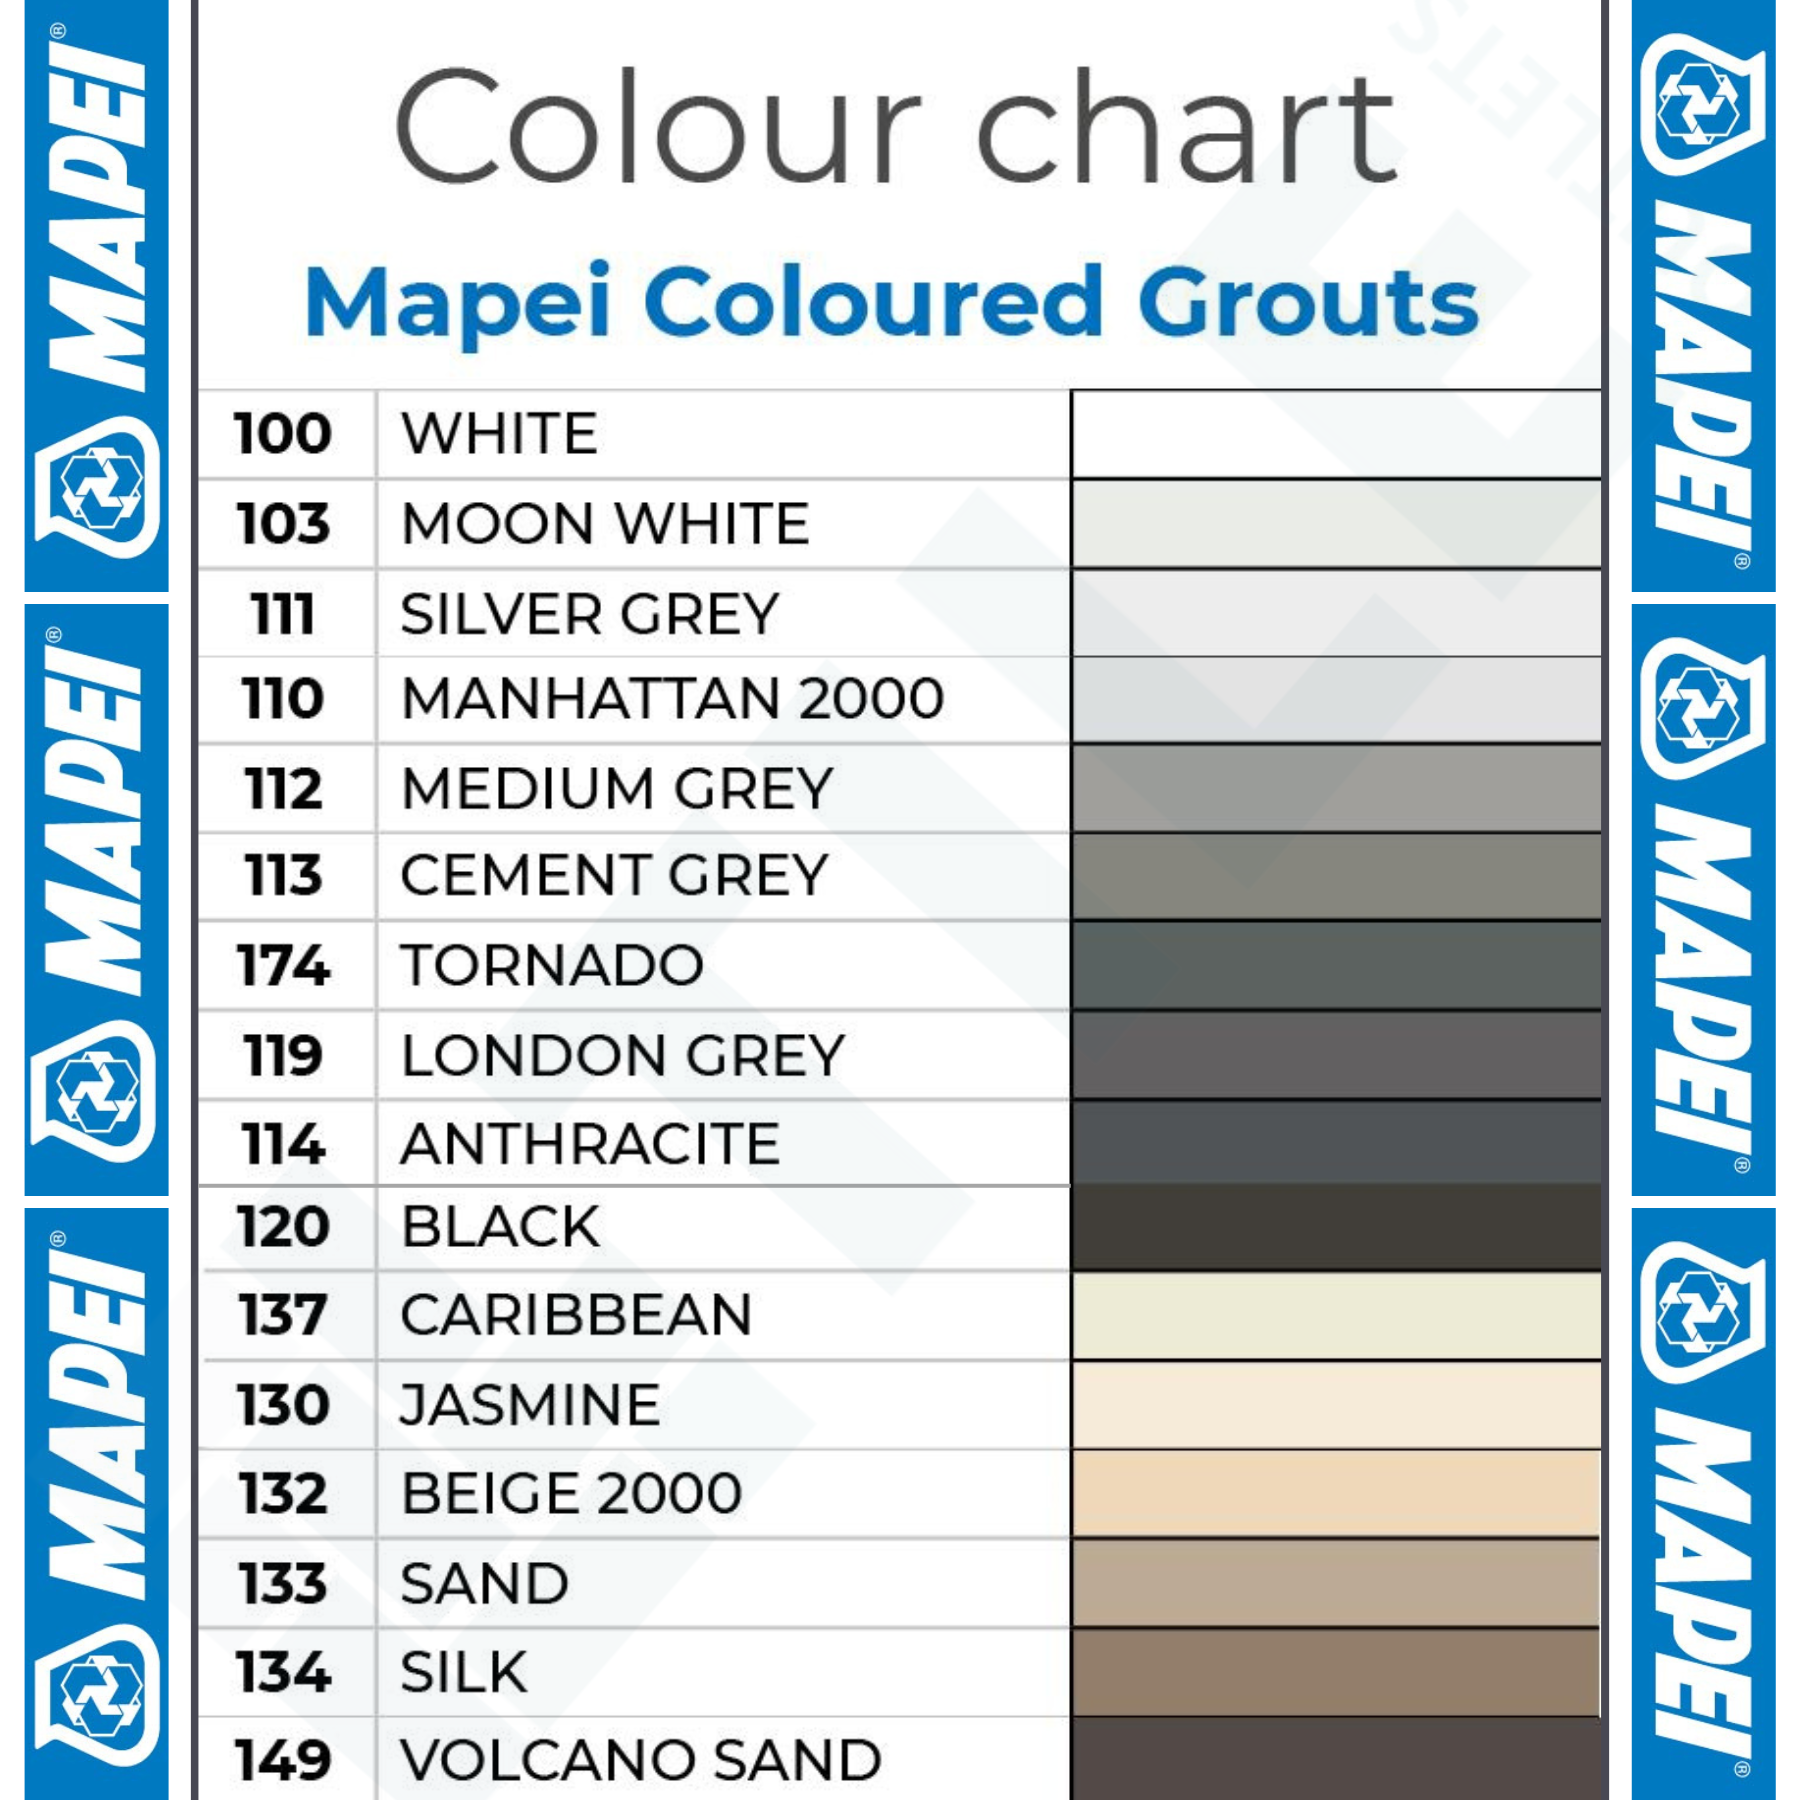 Mapei UltraColour Plus Anthracite 114 Grout